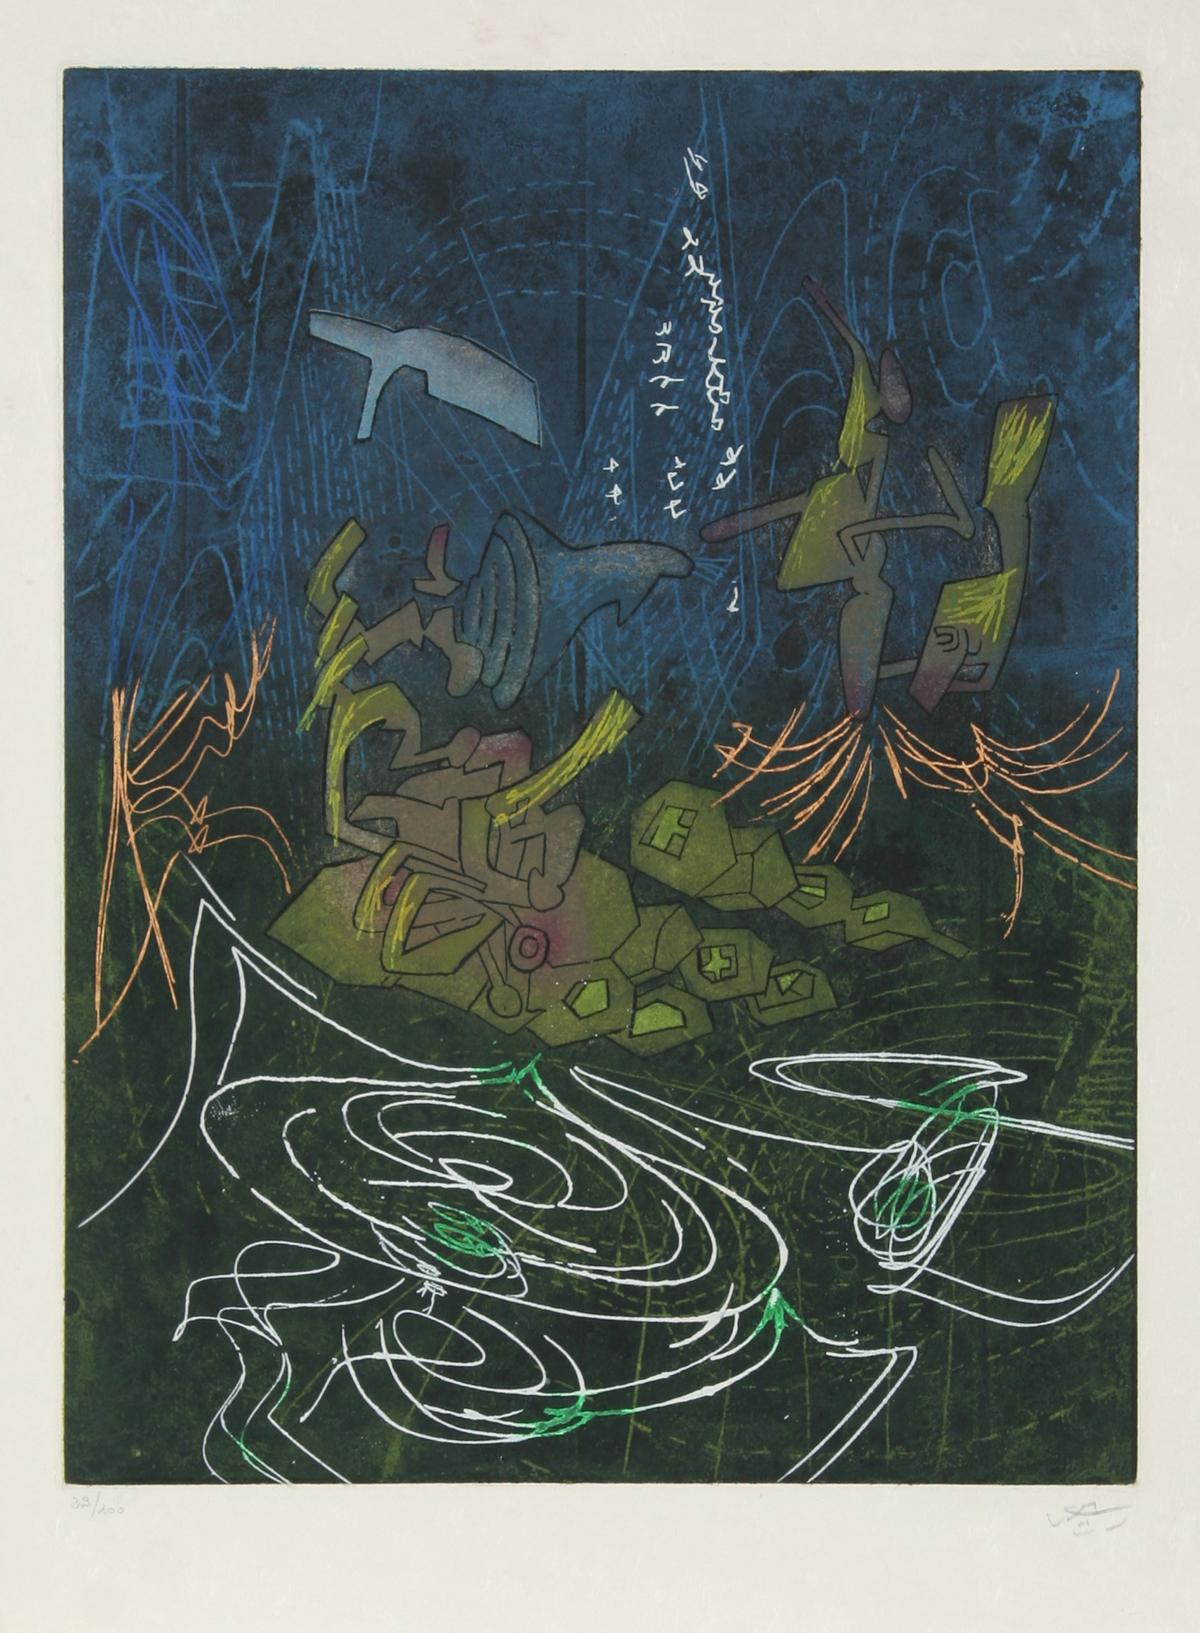 Artist: Roberto Matta (Chilean, 1911 - 2002)
Title: Untitled 3
Portfolio: Hom'mere V - N'ous
Date: 1985
Medium: Etching and aquatint, signed and numbered in pencil
Edition: 29/100
Image size: 19.5 x 15 inches
Paper size: 26.5 x 20.5 inches

